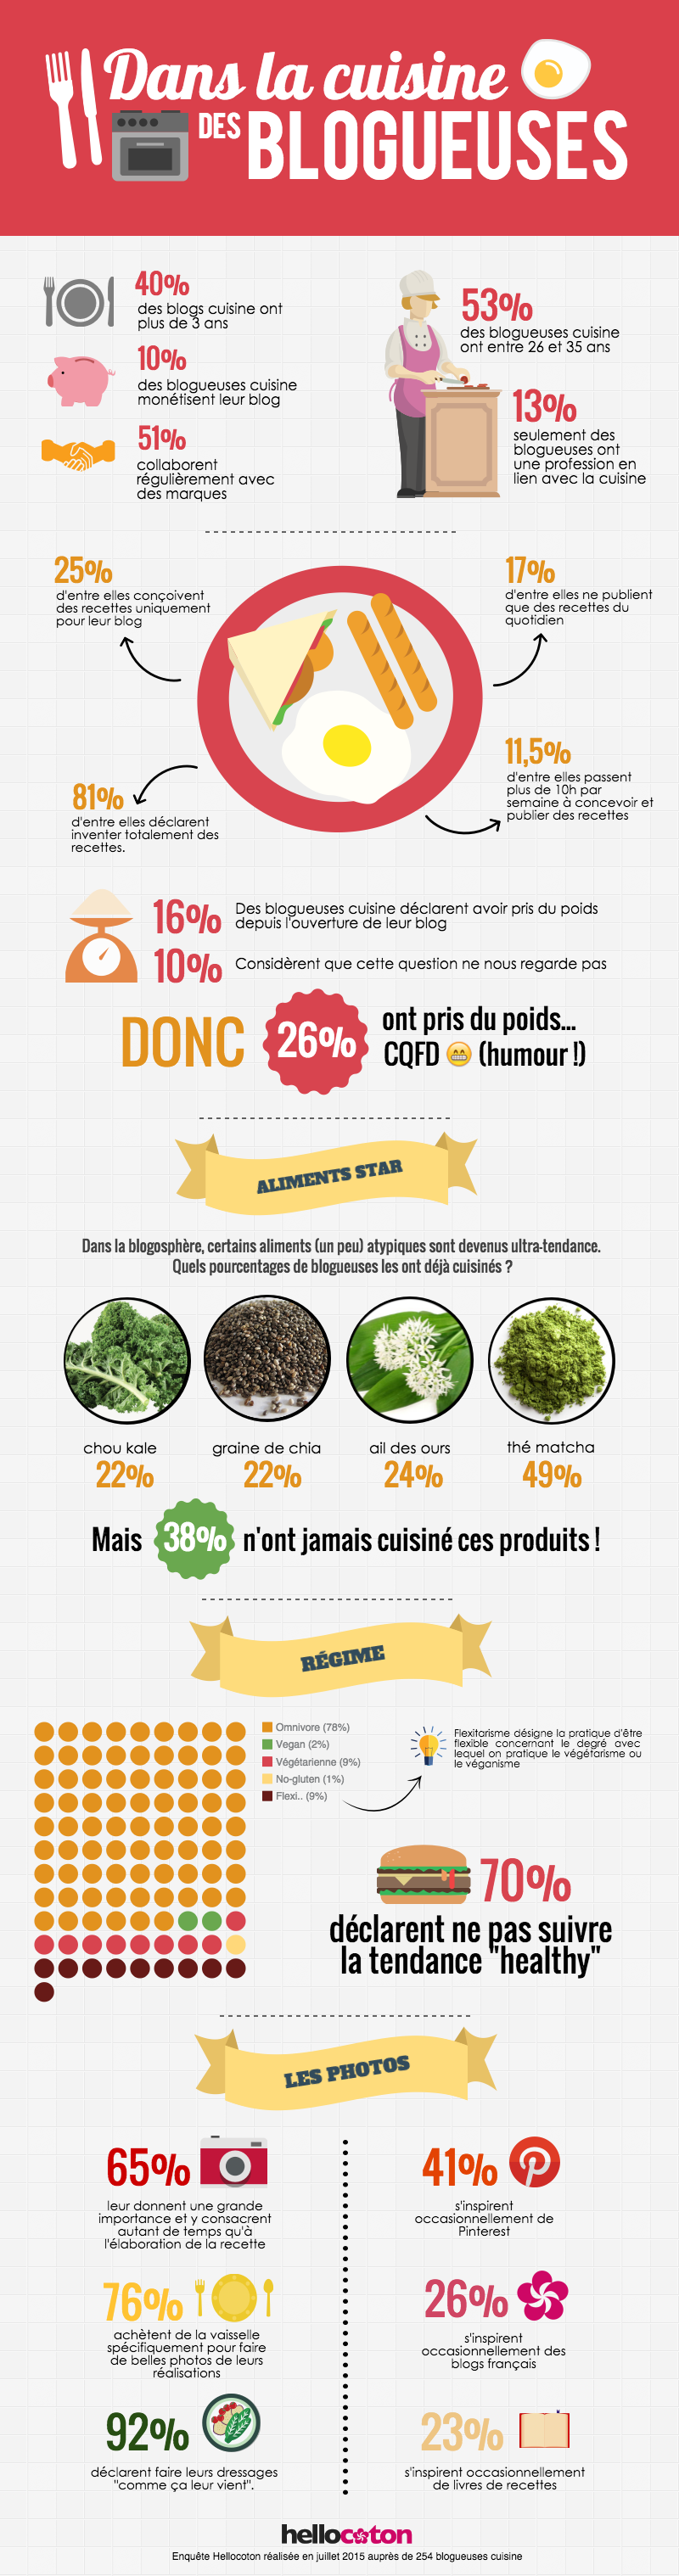 infographie-blogueuses-cuisine